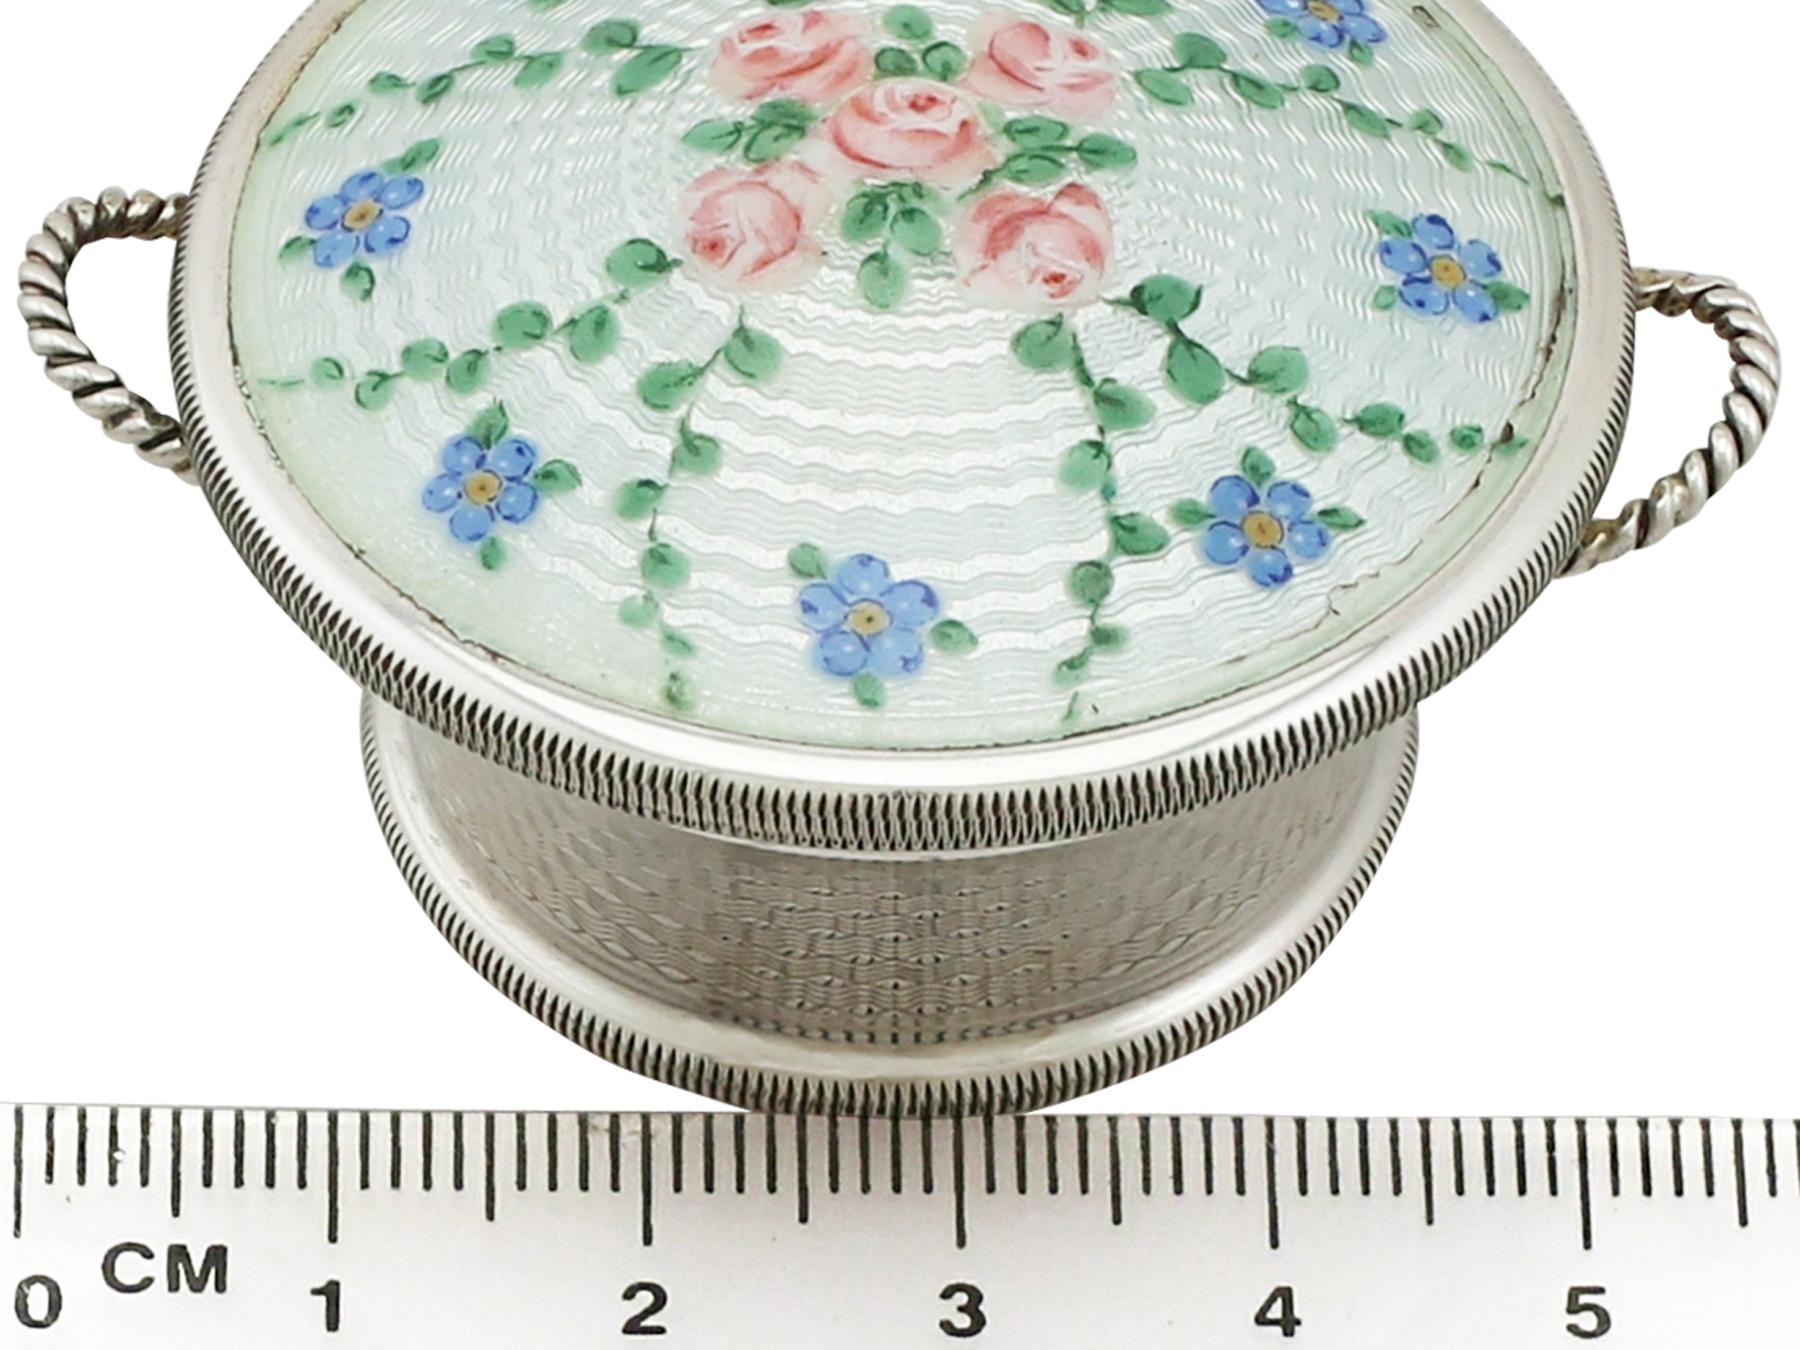 Antique Sterling Silver and Enamel Trinket Box by Levi and Salaman 4